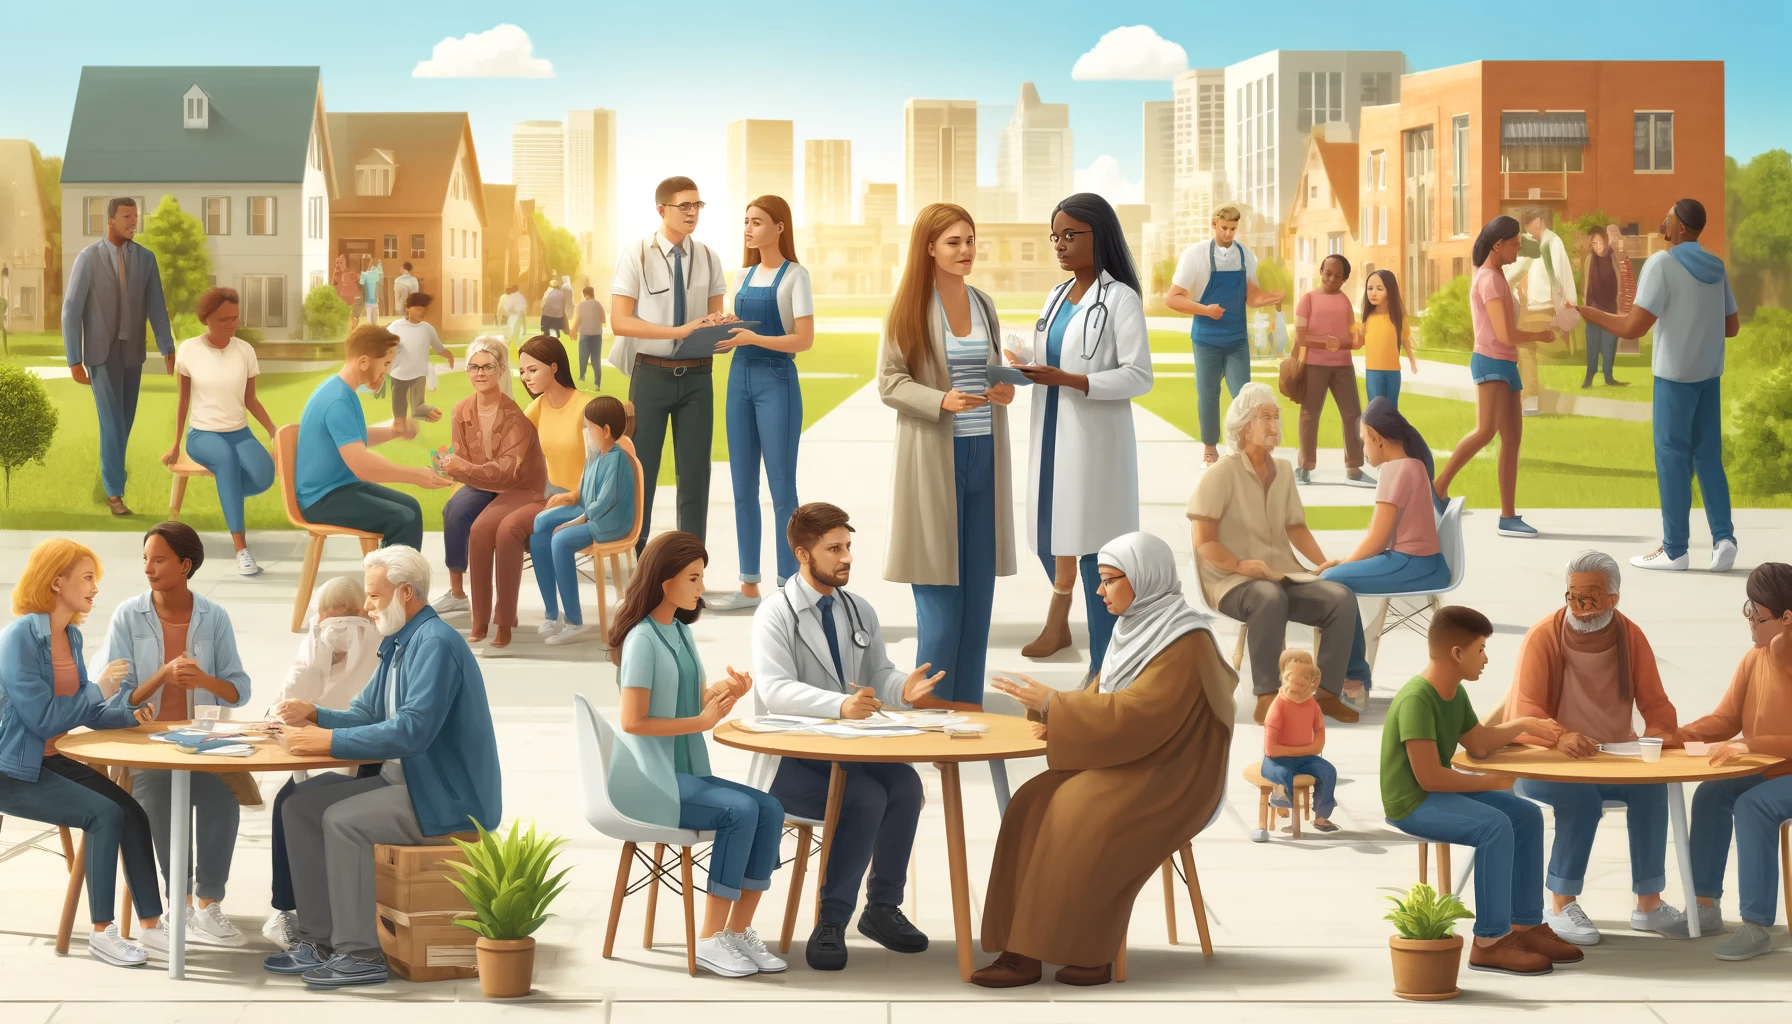 A diverse group of social workers engaging with the community. It depicts social workers of different ethnicities and genders interacting with people of various ages and backgrounds in an urban setting. This vibrant scene captures the essence of community engagement and the important role of Social Workers in various environments.